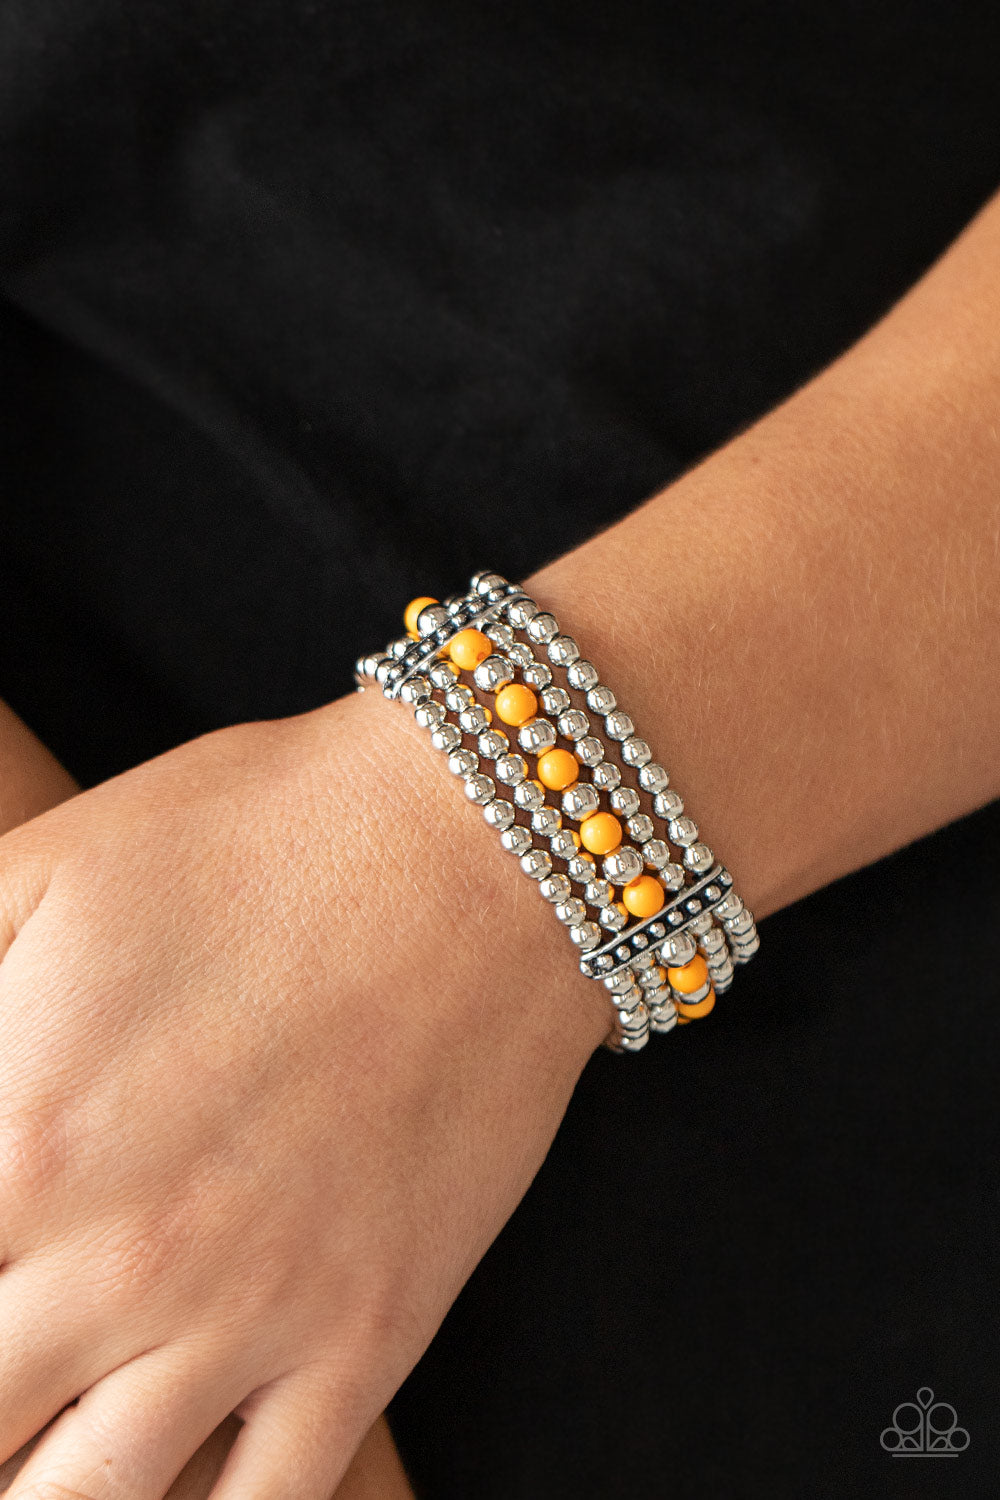 Gloss Over The Details - Orange Stretchy Bracelet Paparazzi Accessories